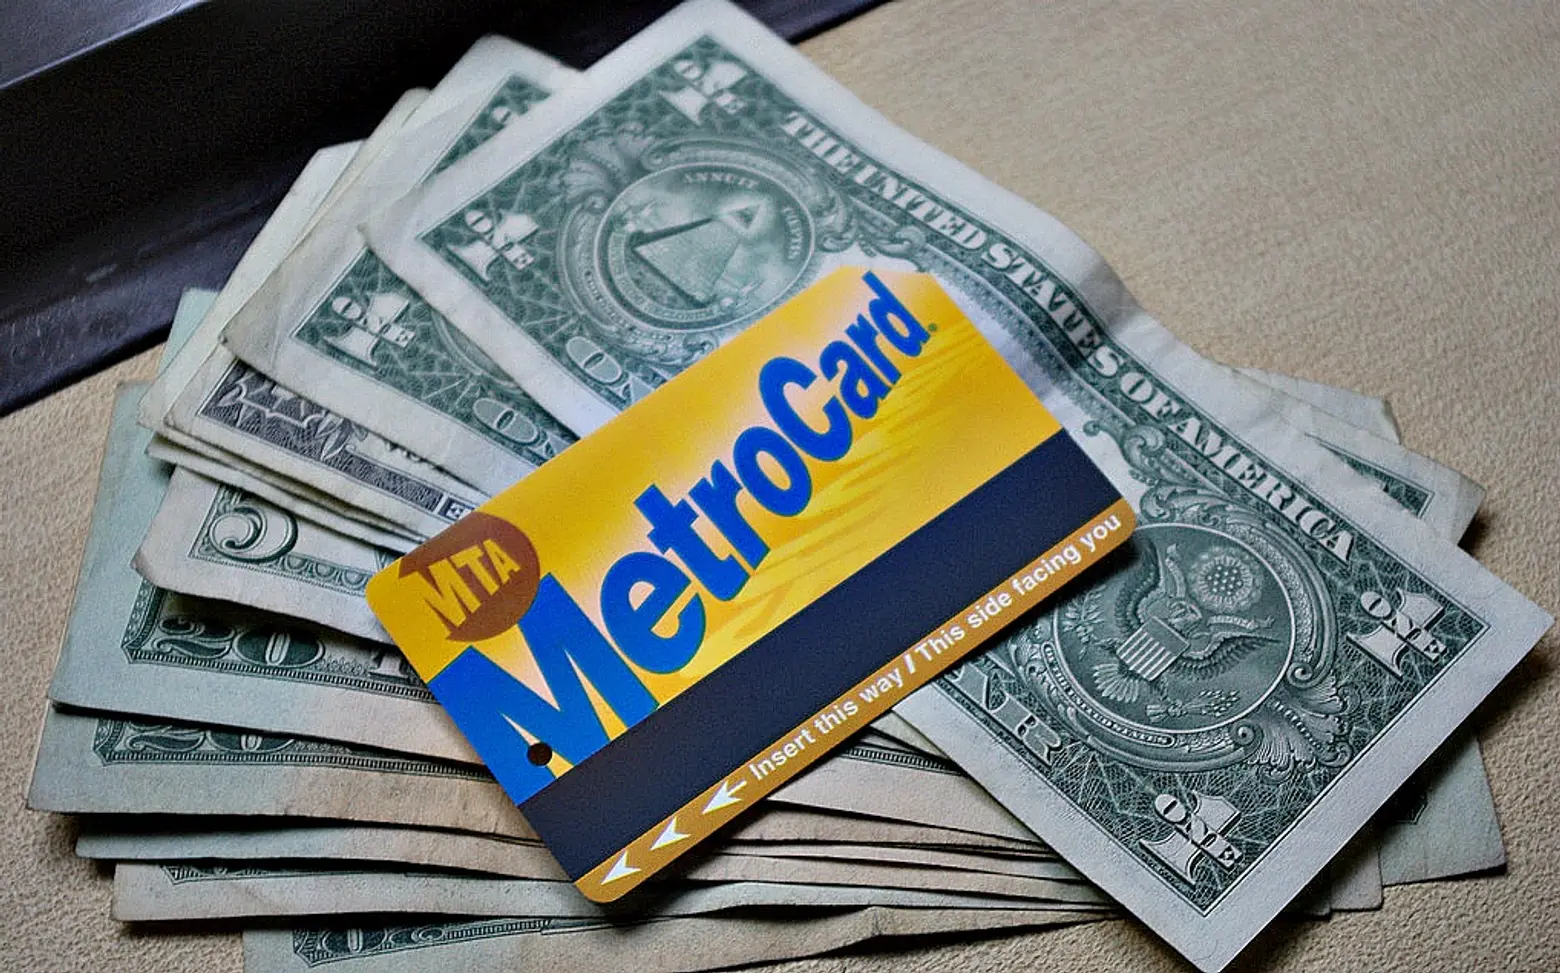 MetroCard fare hike starts Sunday; Museum of the Dog relocating to NYC